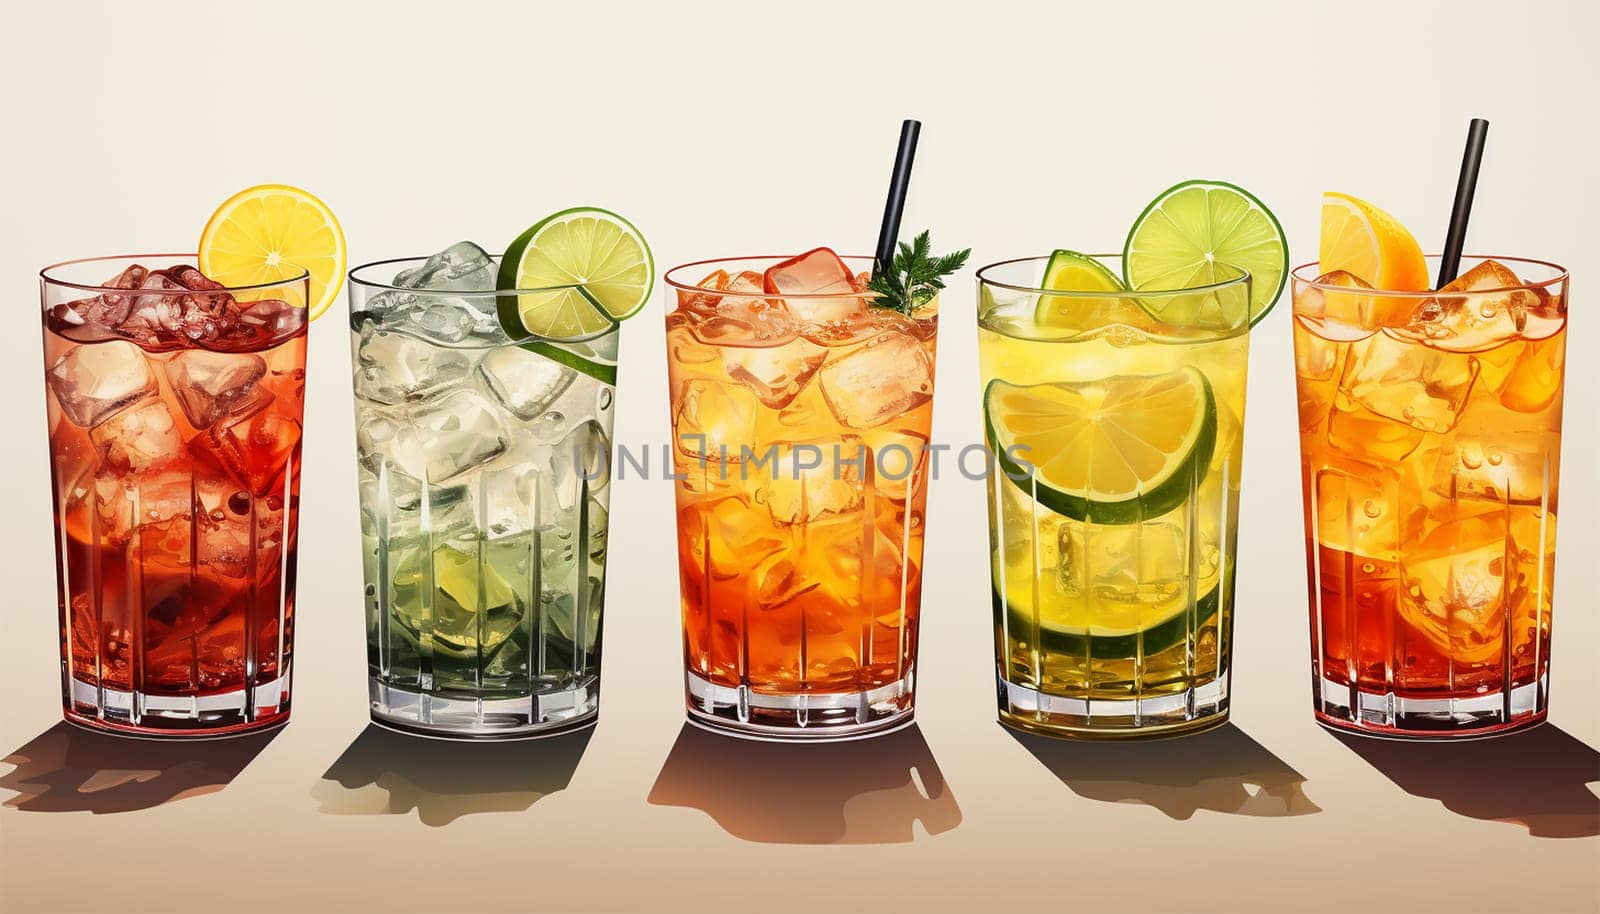 Row of various drinks on light background. Collection of various alcoholic cocktails drink glasses, icons set, different kind of mocktails colorful. Cocktail party concept celebration